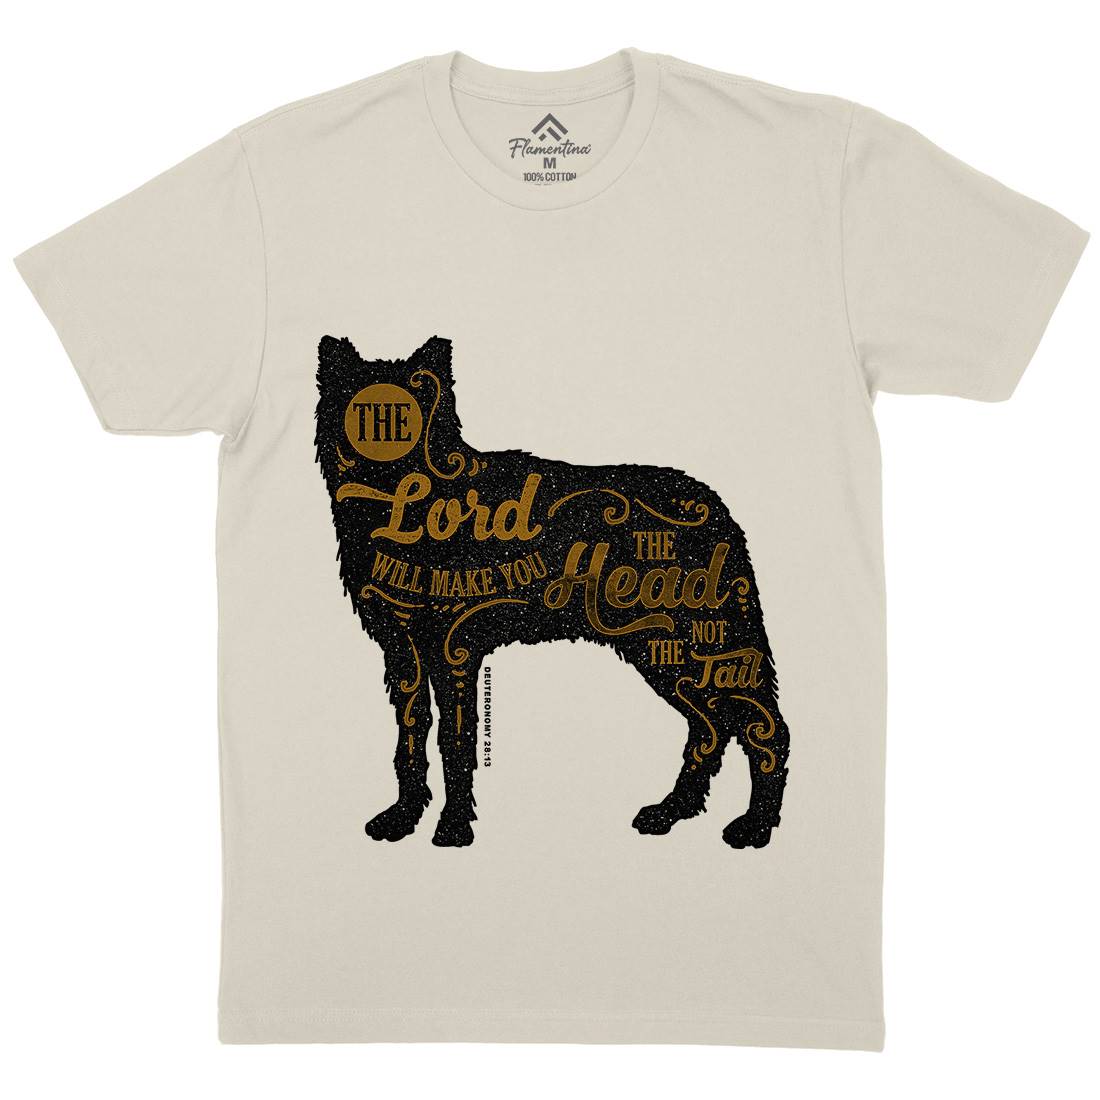 Head Not The Tail Mens Organic Crew Neck T-Shirt Religion A326